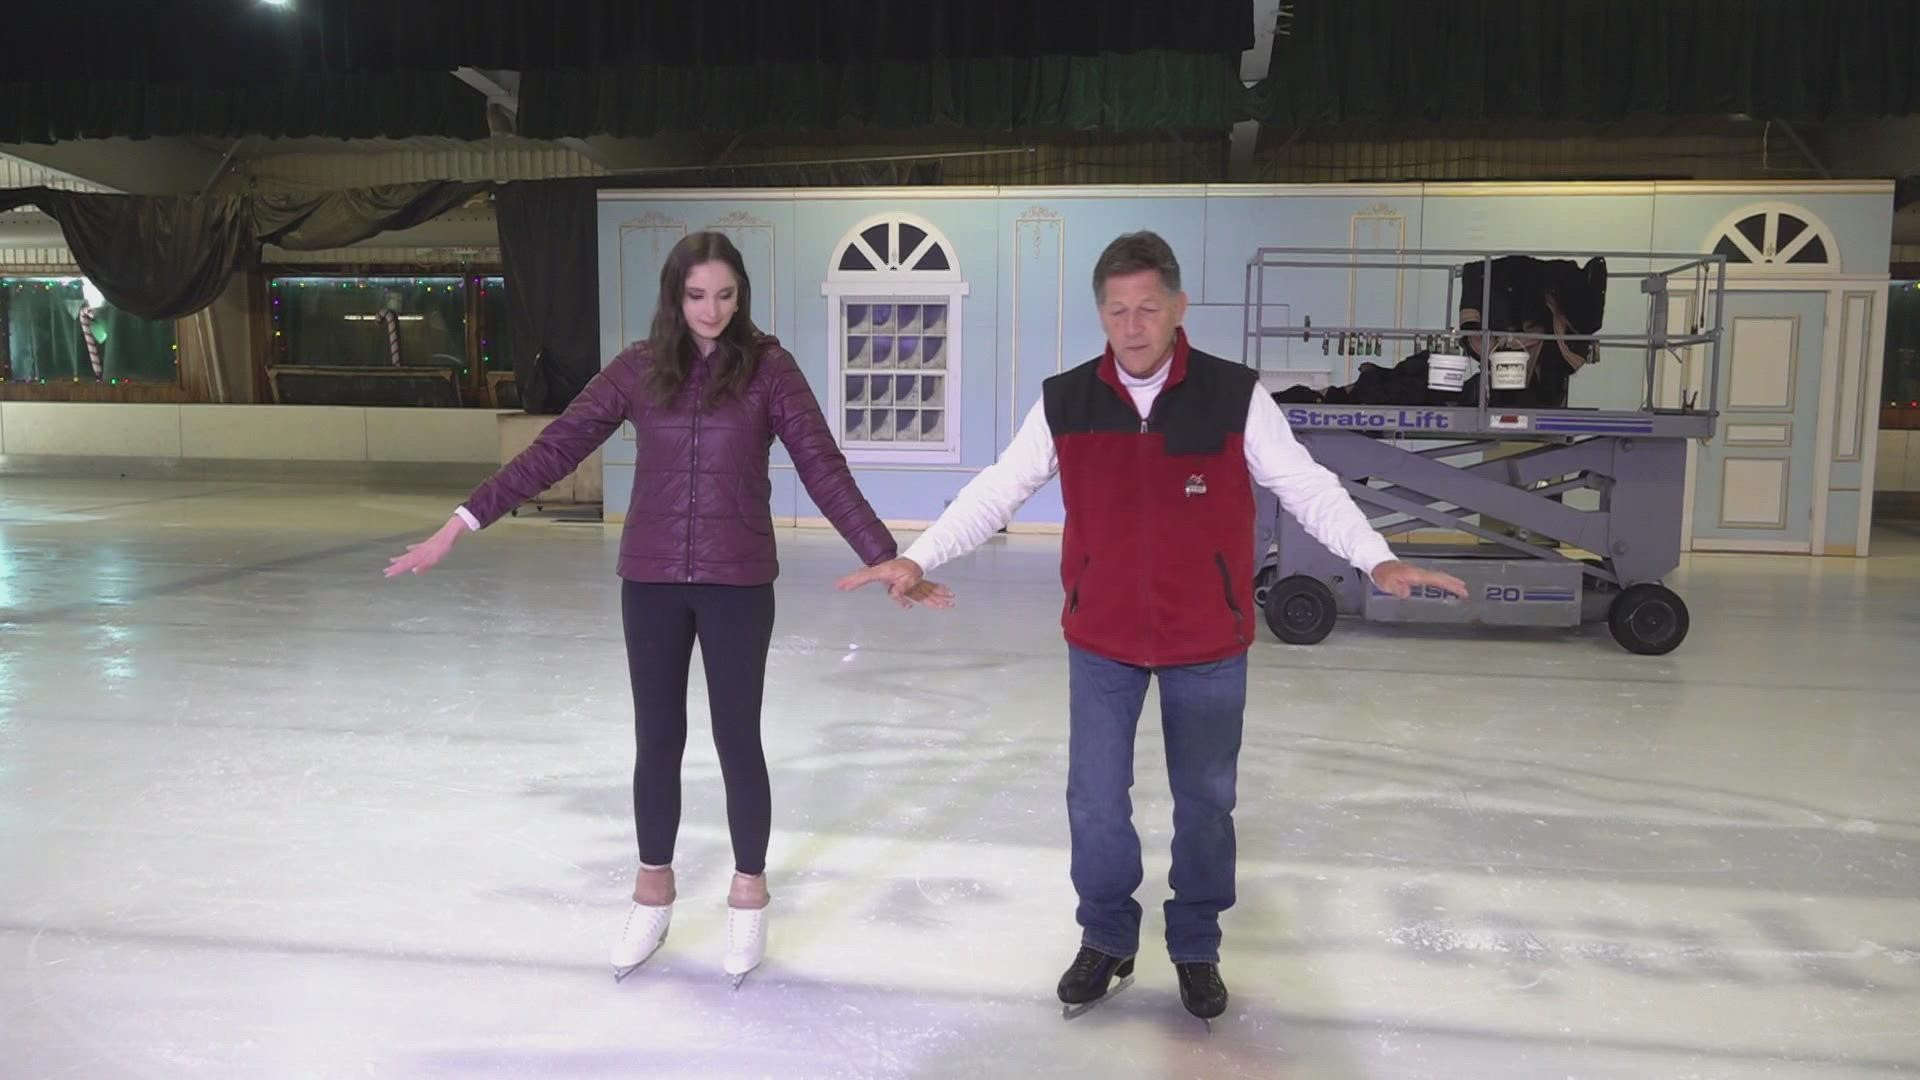 10News reporter Grace King is joined by her skating instructor to discuss what you should know before heading out on the ice.